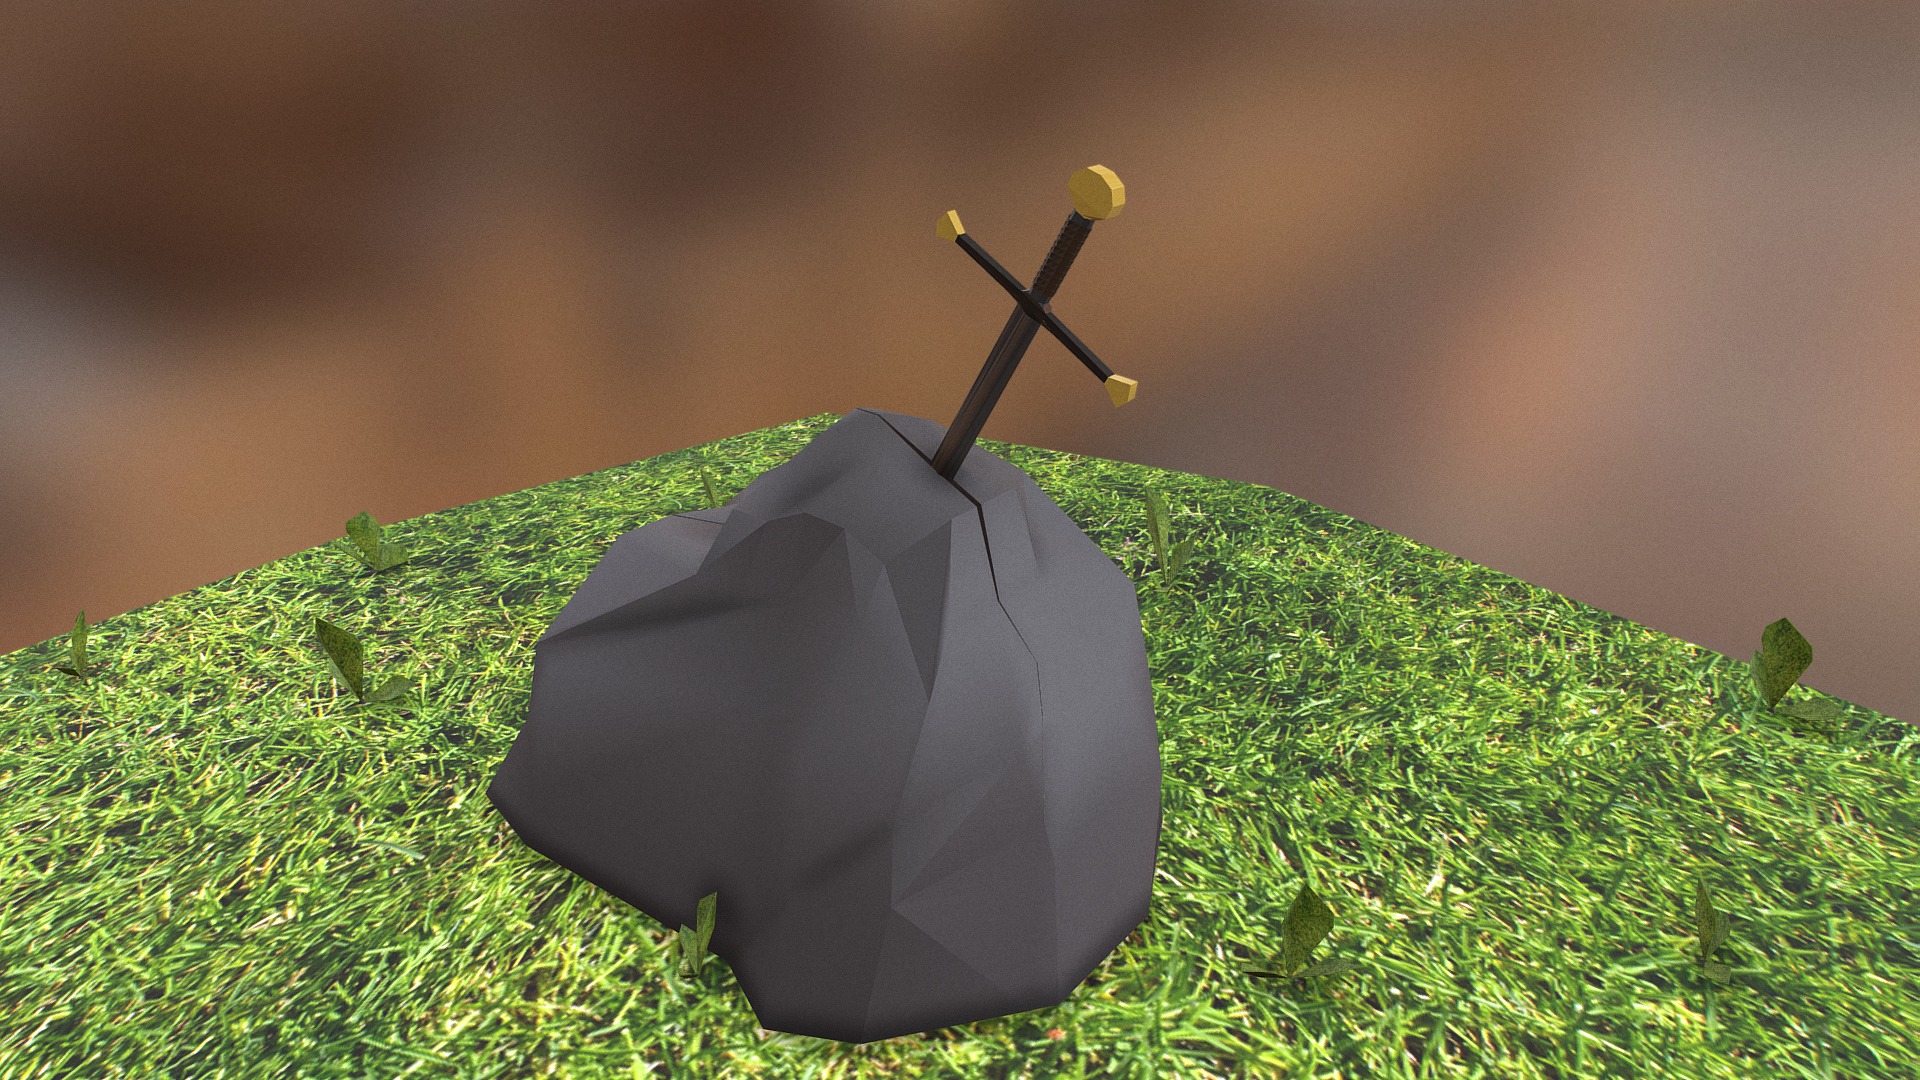 3D model Sword in stone - This is a 3D model of the Sword in stone. The 3D model is about a black umbrella on grass.